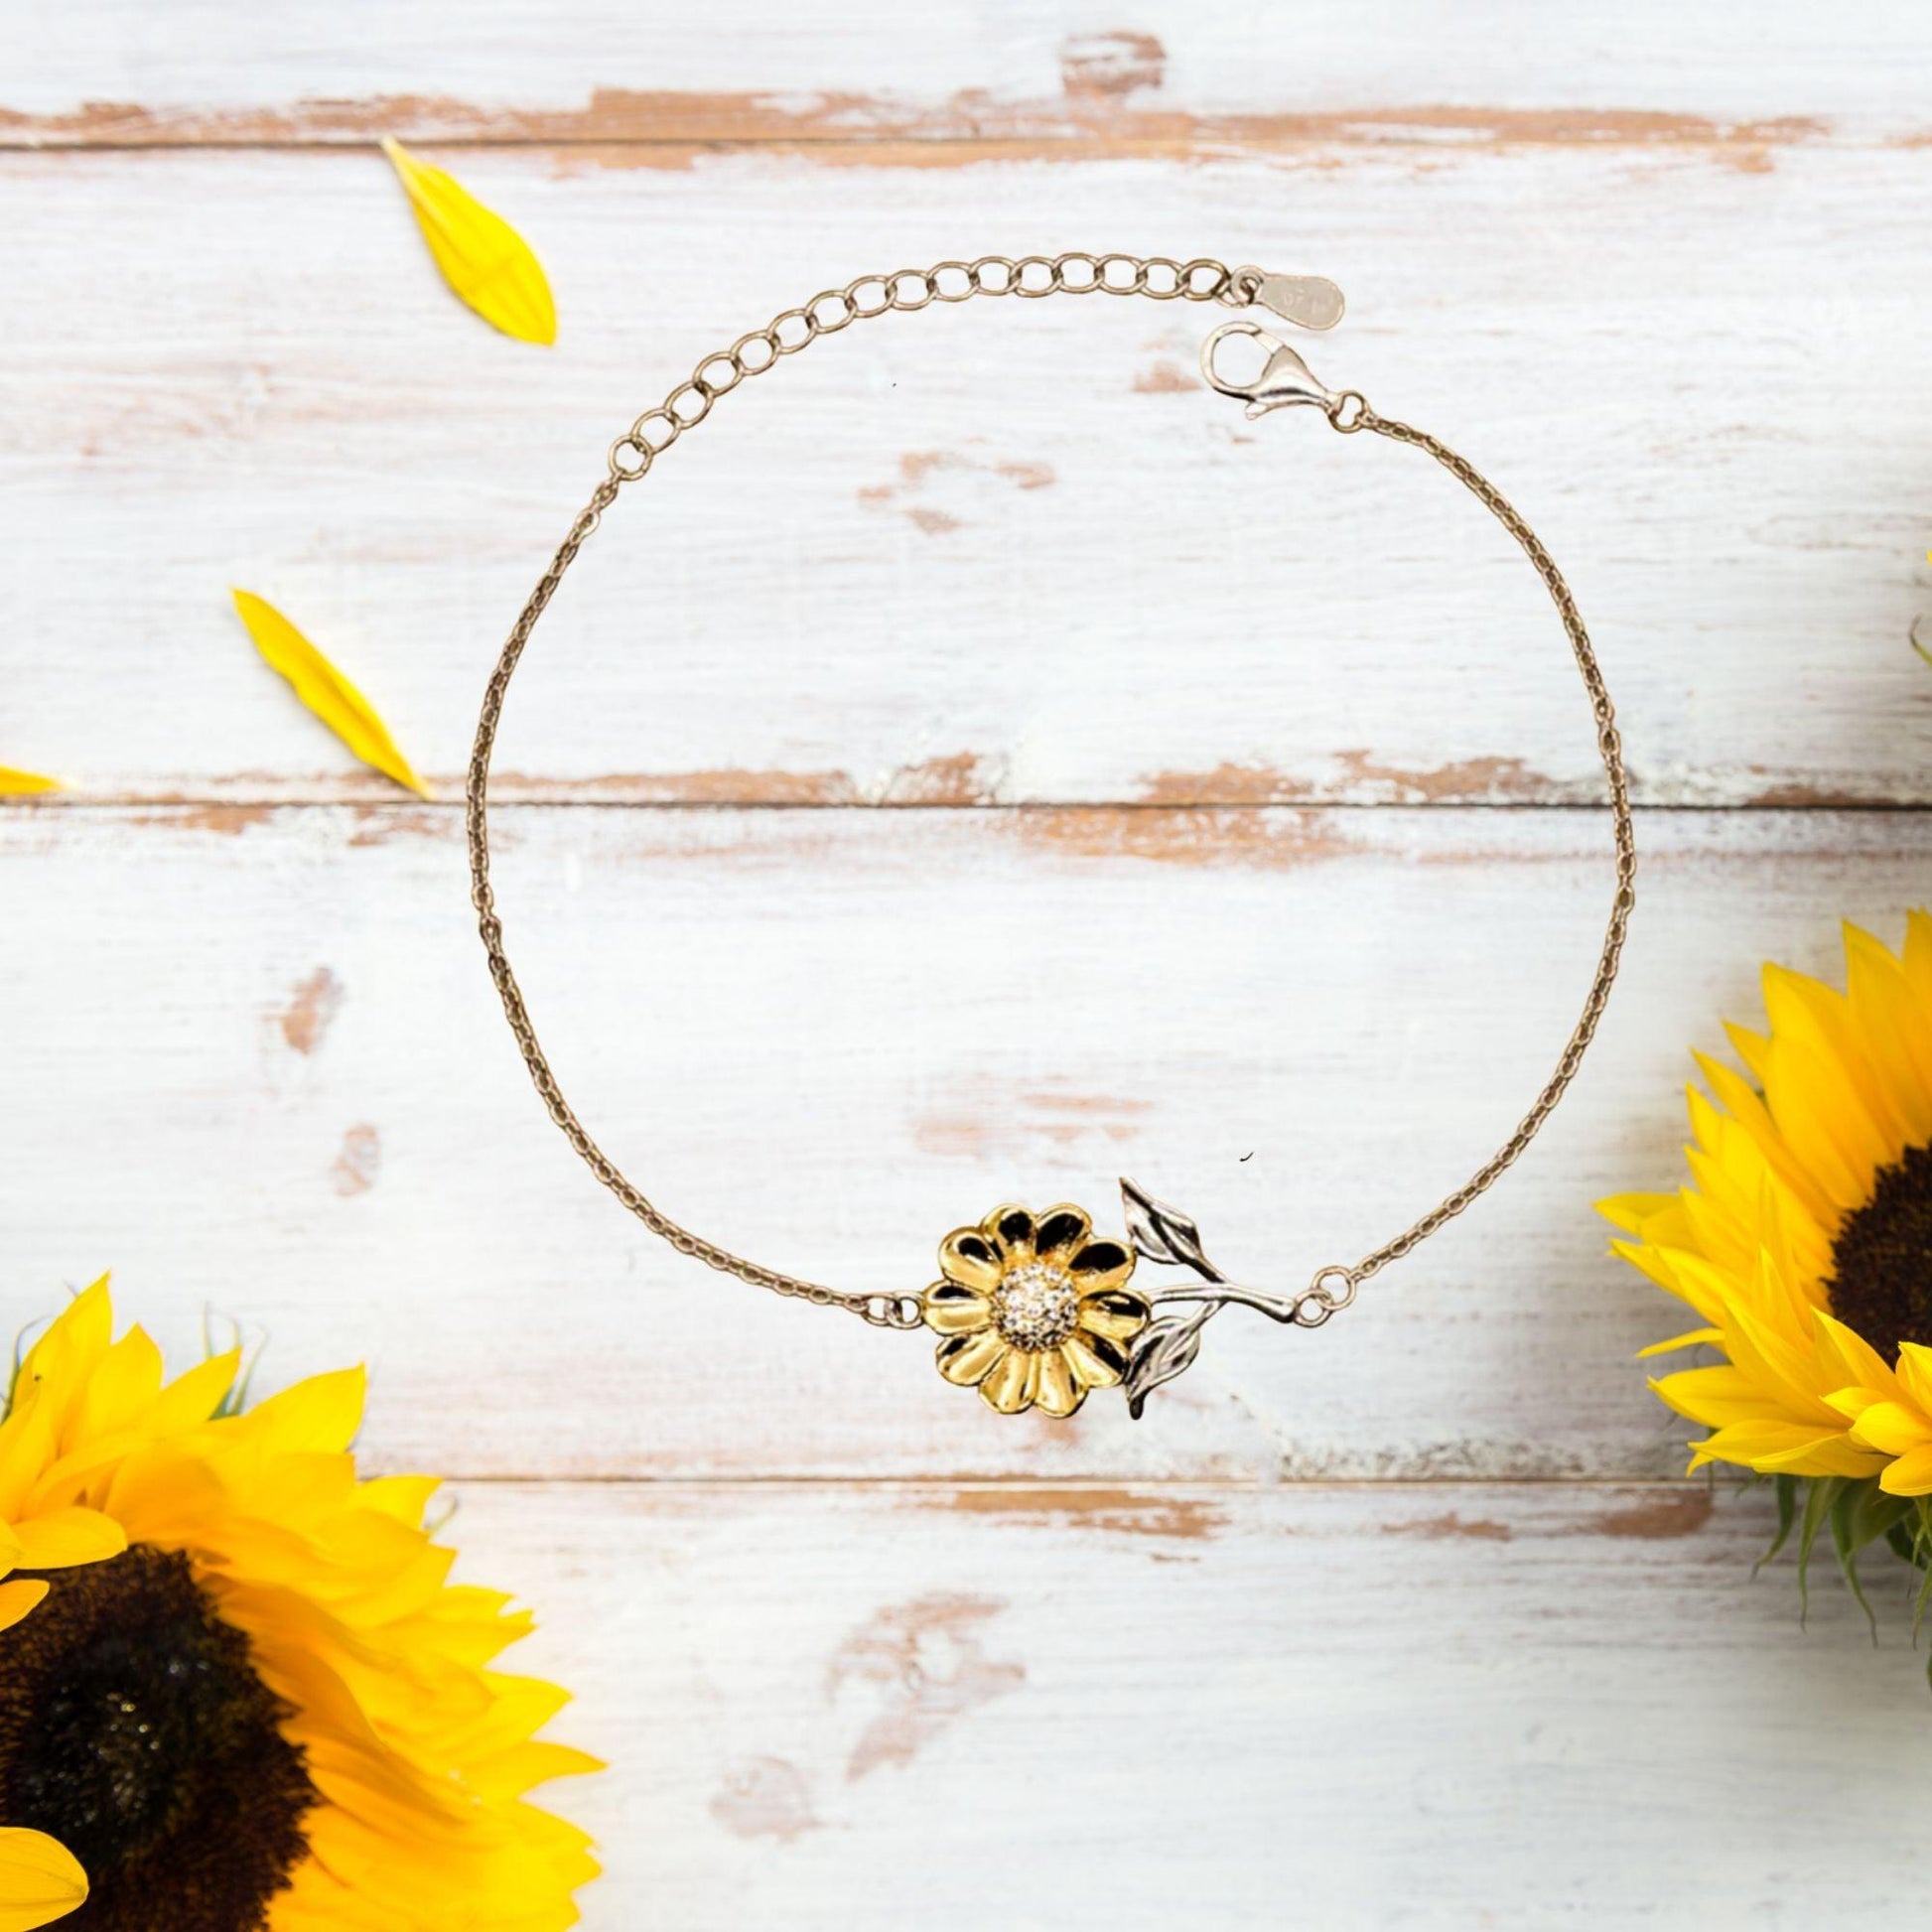 Remarkable Massage Therapist Gifts, Your dedication and hard work, Inspirational Birthday Christmas Unique Sunflower Bracelet For Massage Therapist, Coworkers, Men, Women, Friends - Mallard Moon Gift Shop